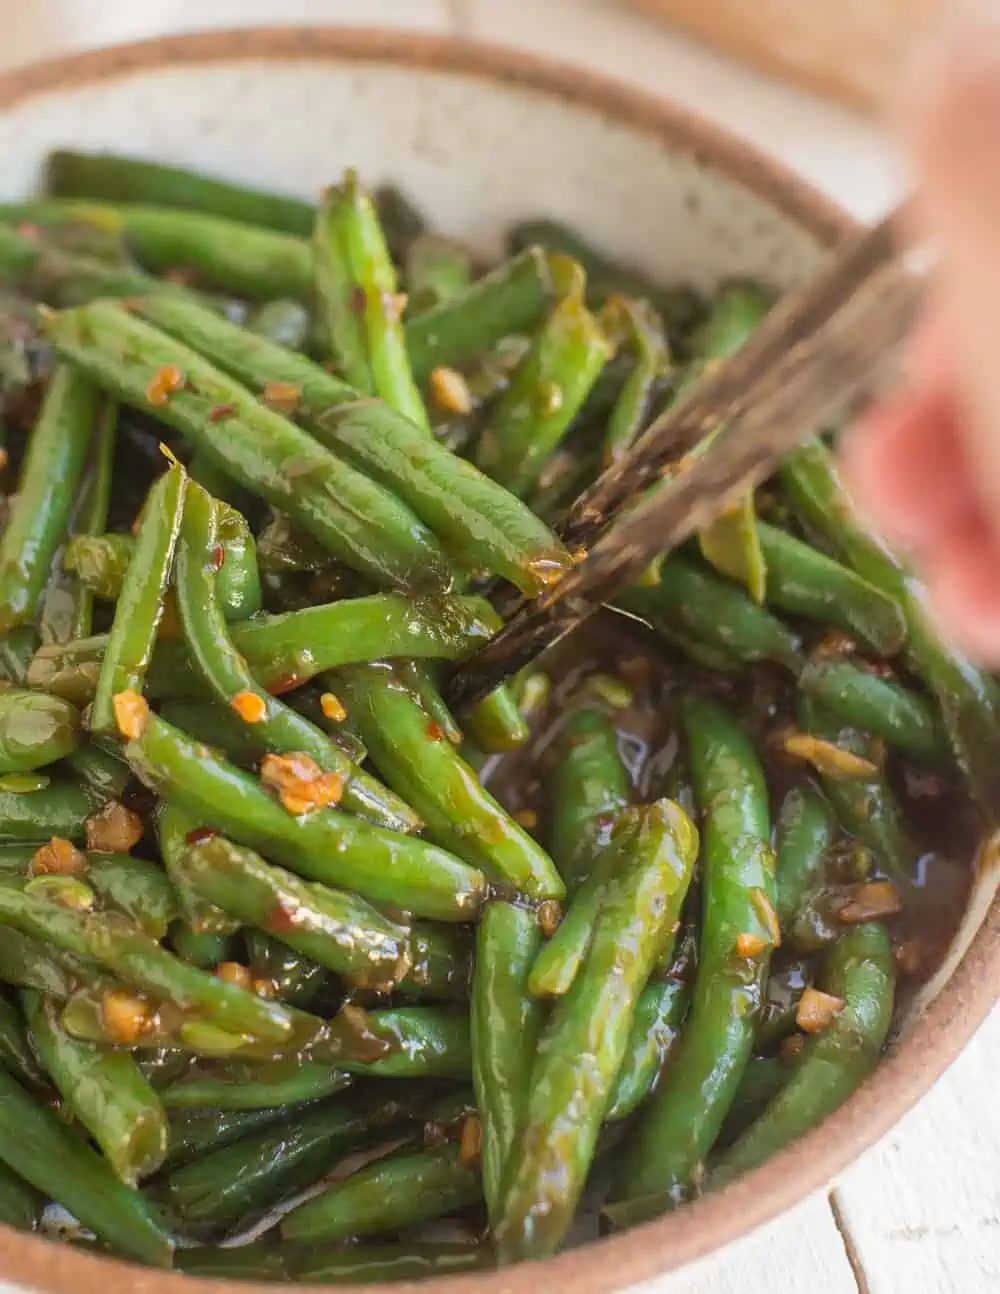 Green beans in a bowl with chopsticks reaching in.